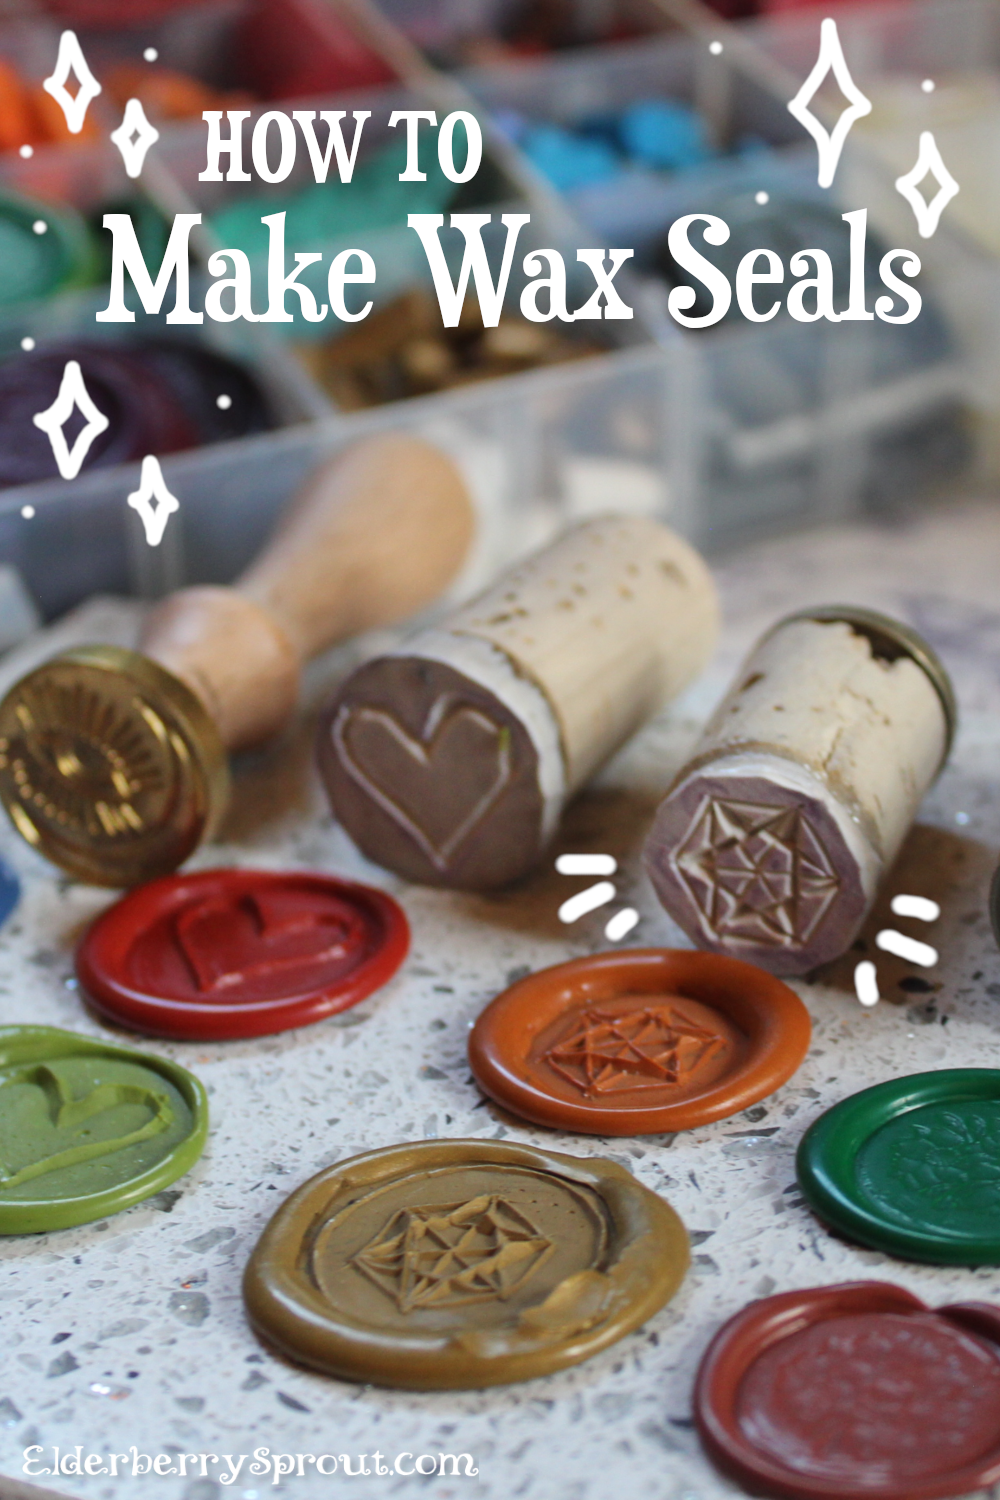 How To Make a Good Wax Seal (Troubleshoot)